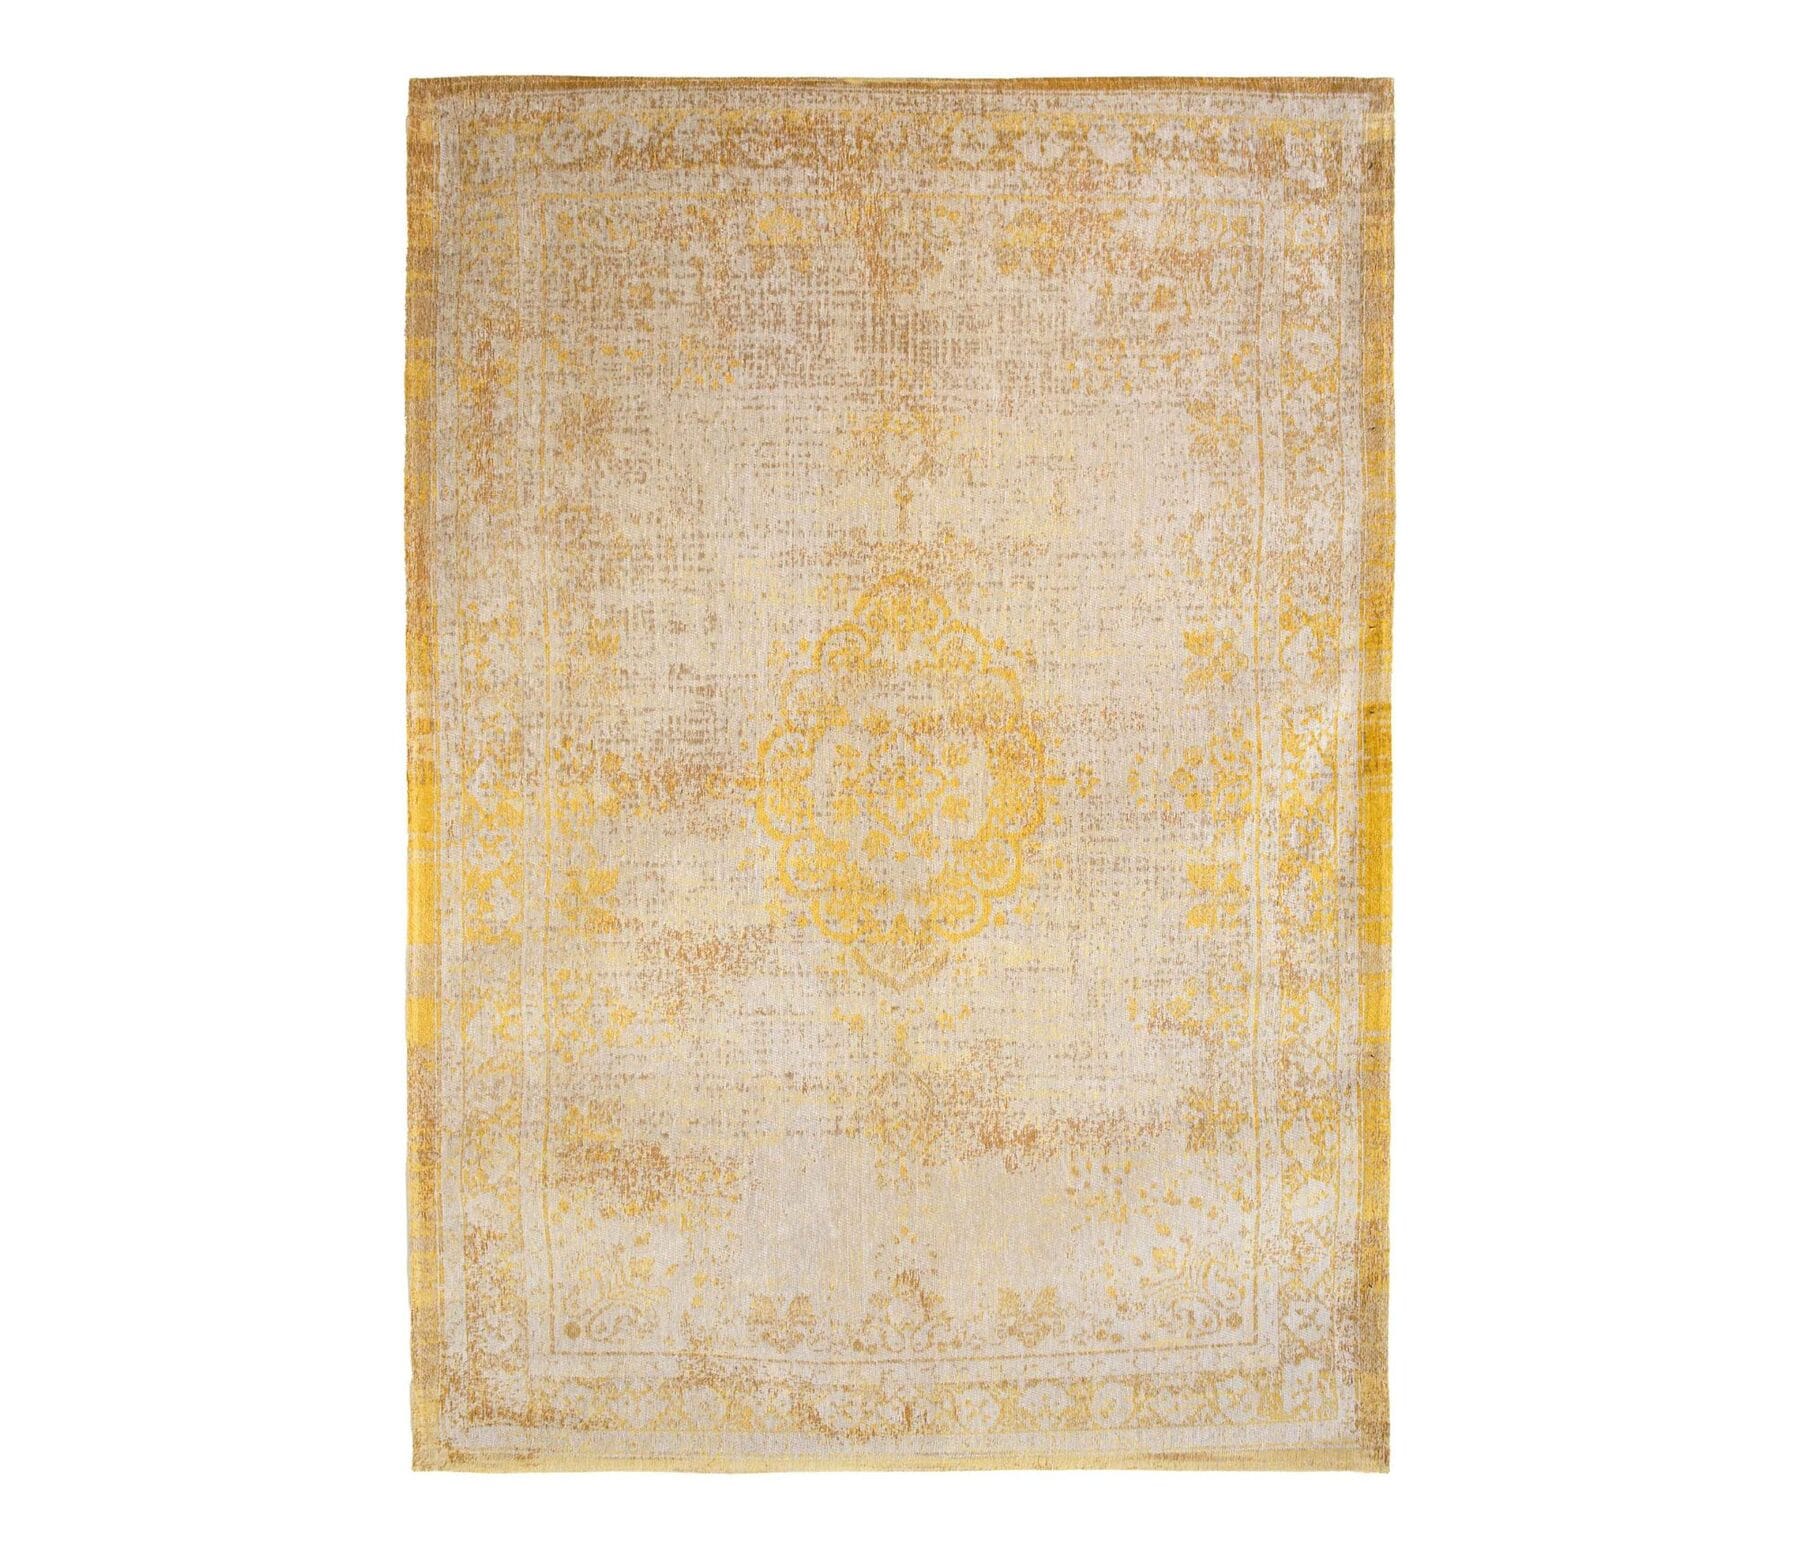 Fading World Collection Medallion Grey Yellow 9062 rug by Louis De Poortere